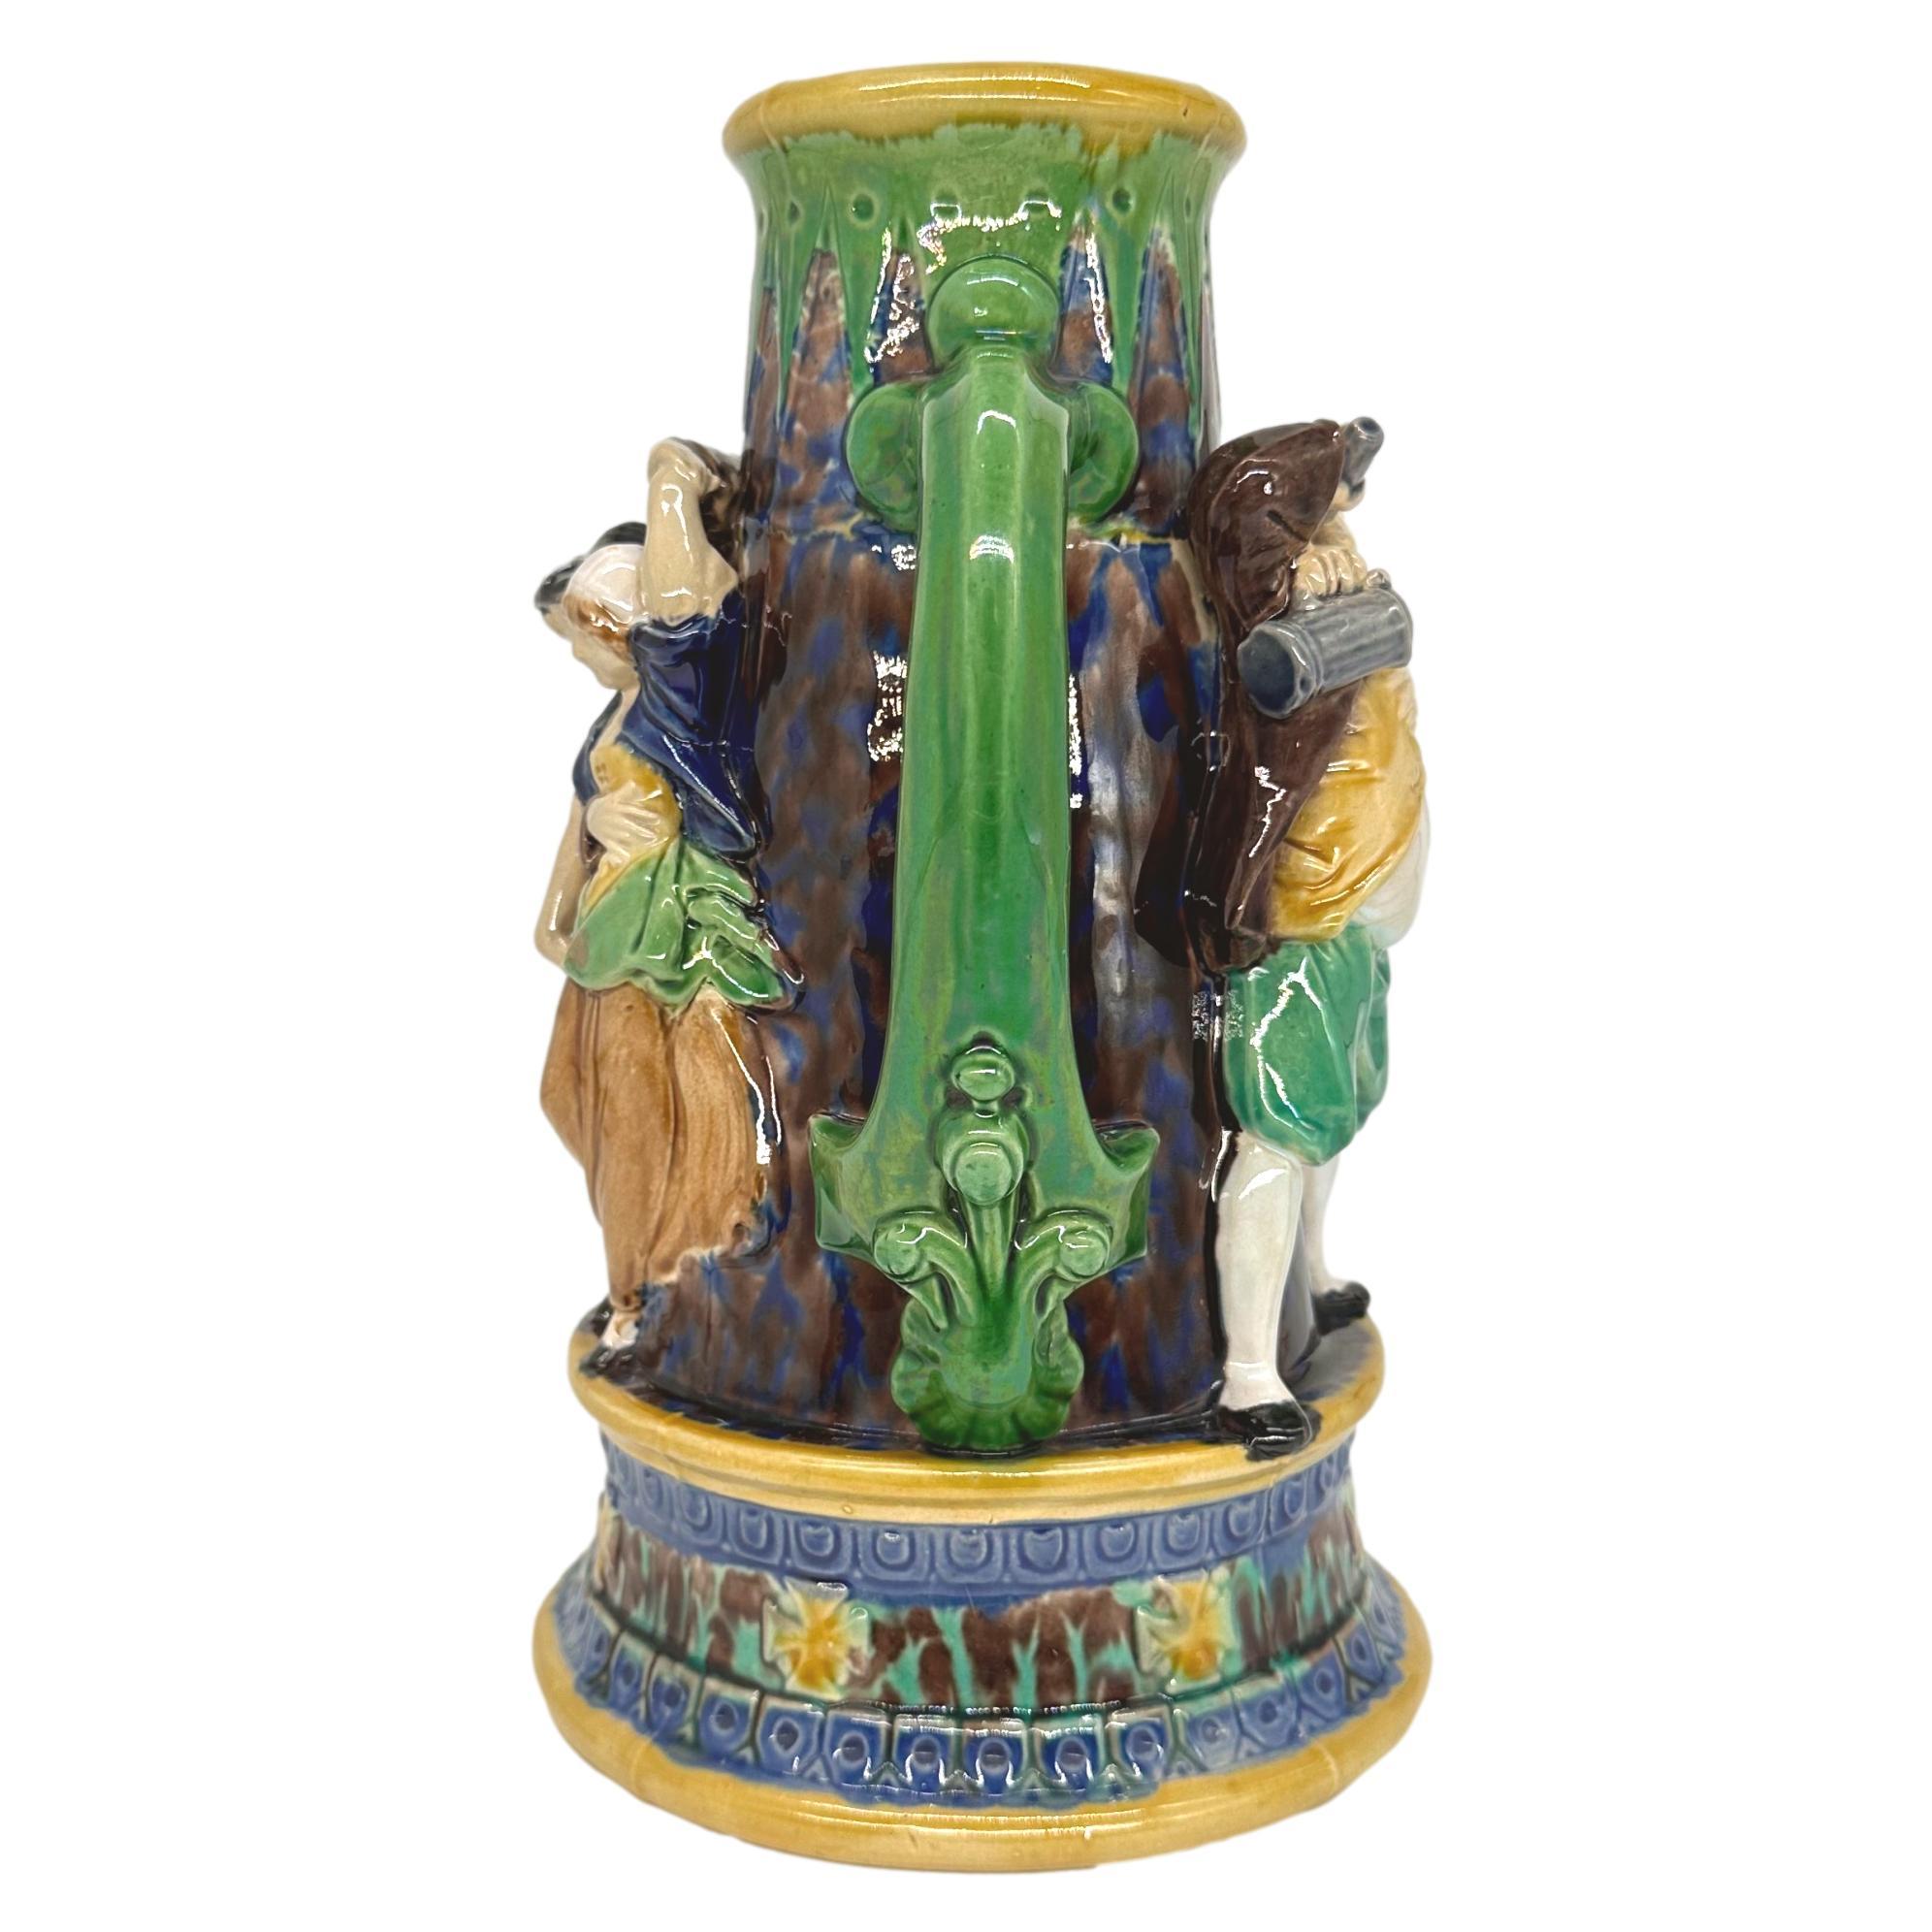 Molded A Minton Majolica Ale Jug with Five Revelers in Medieval Dress, dated 1862 For Sale